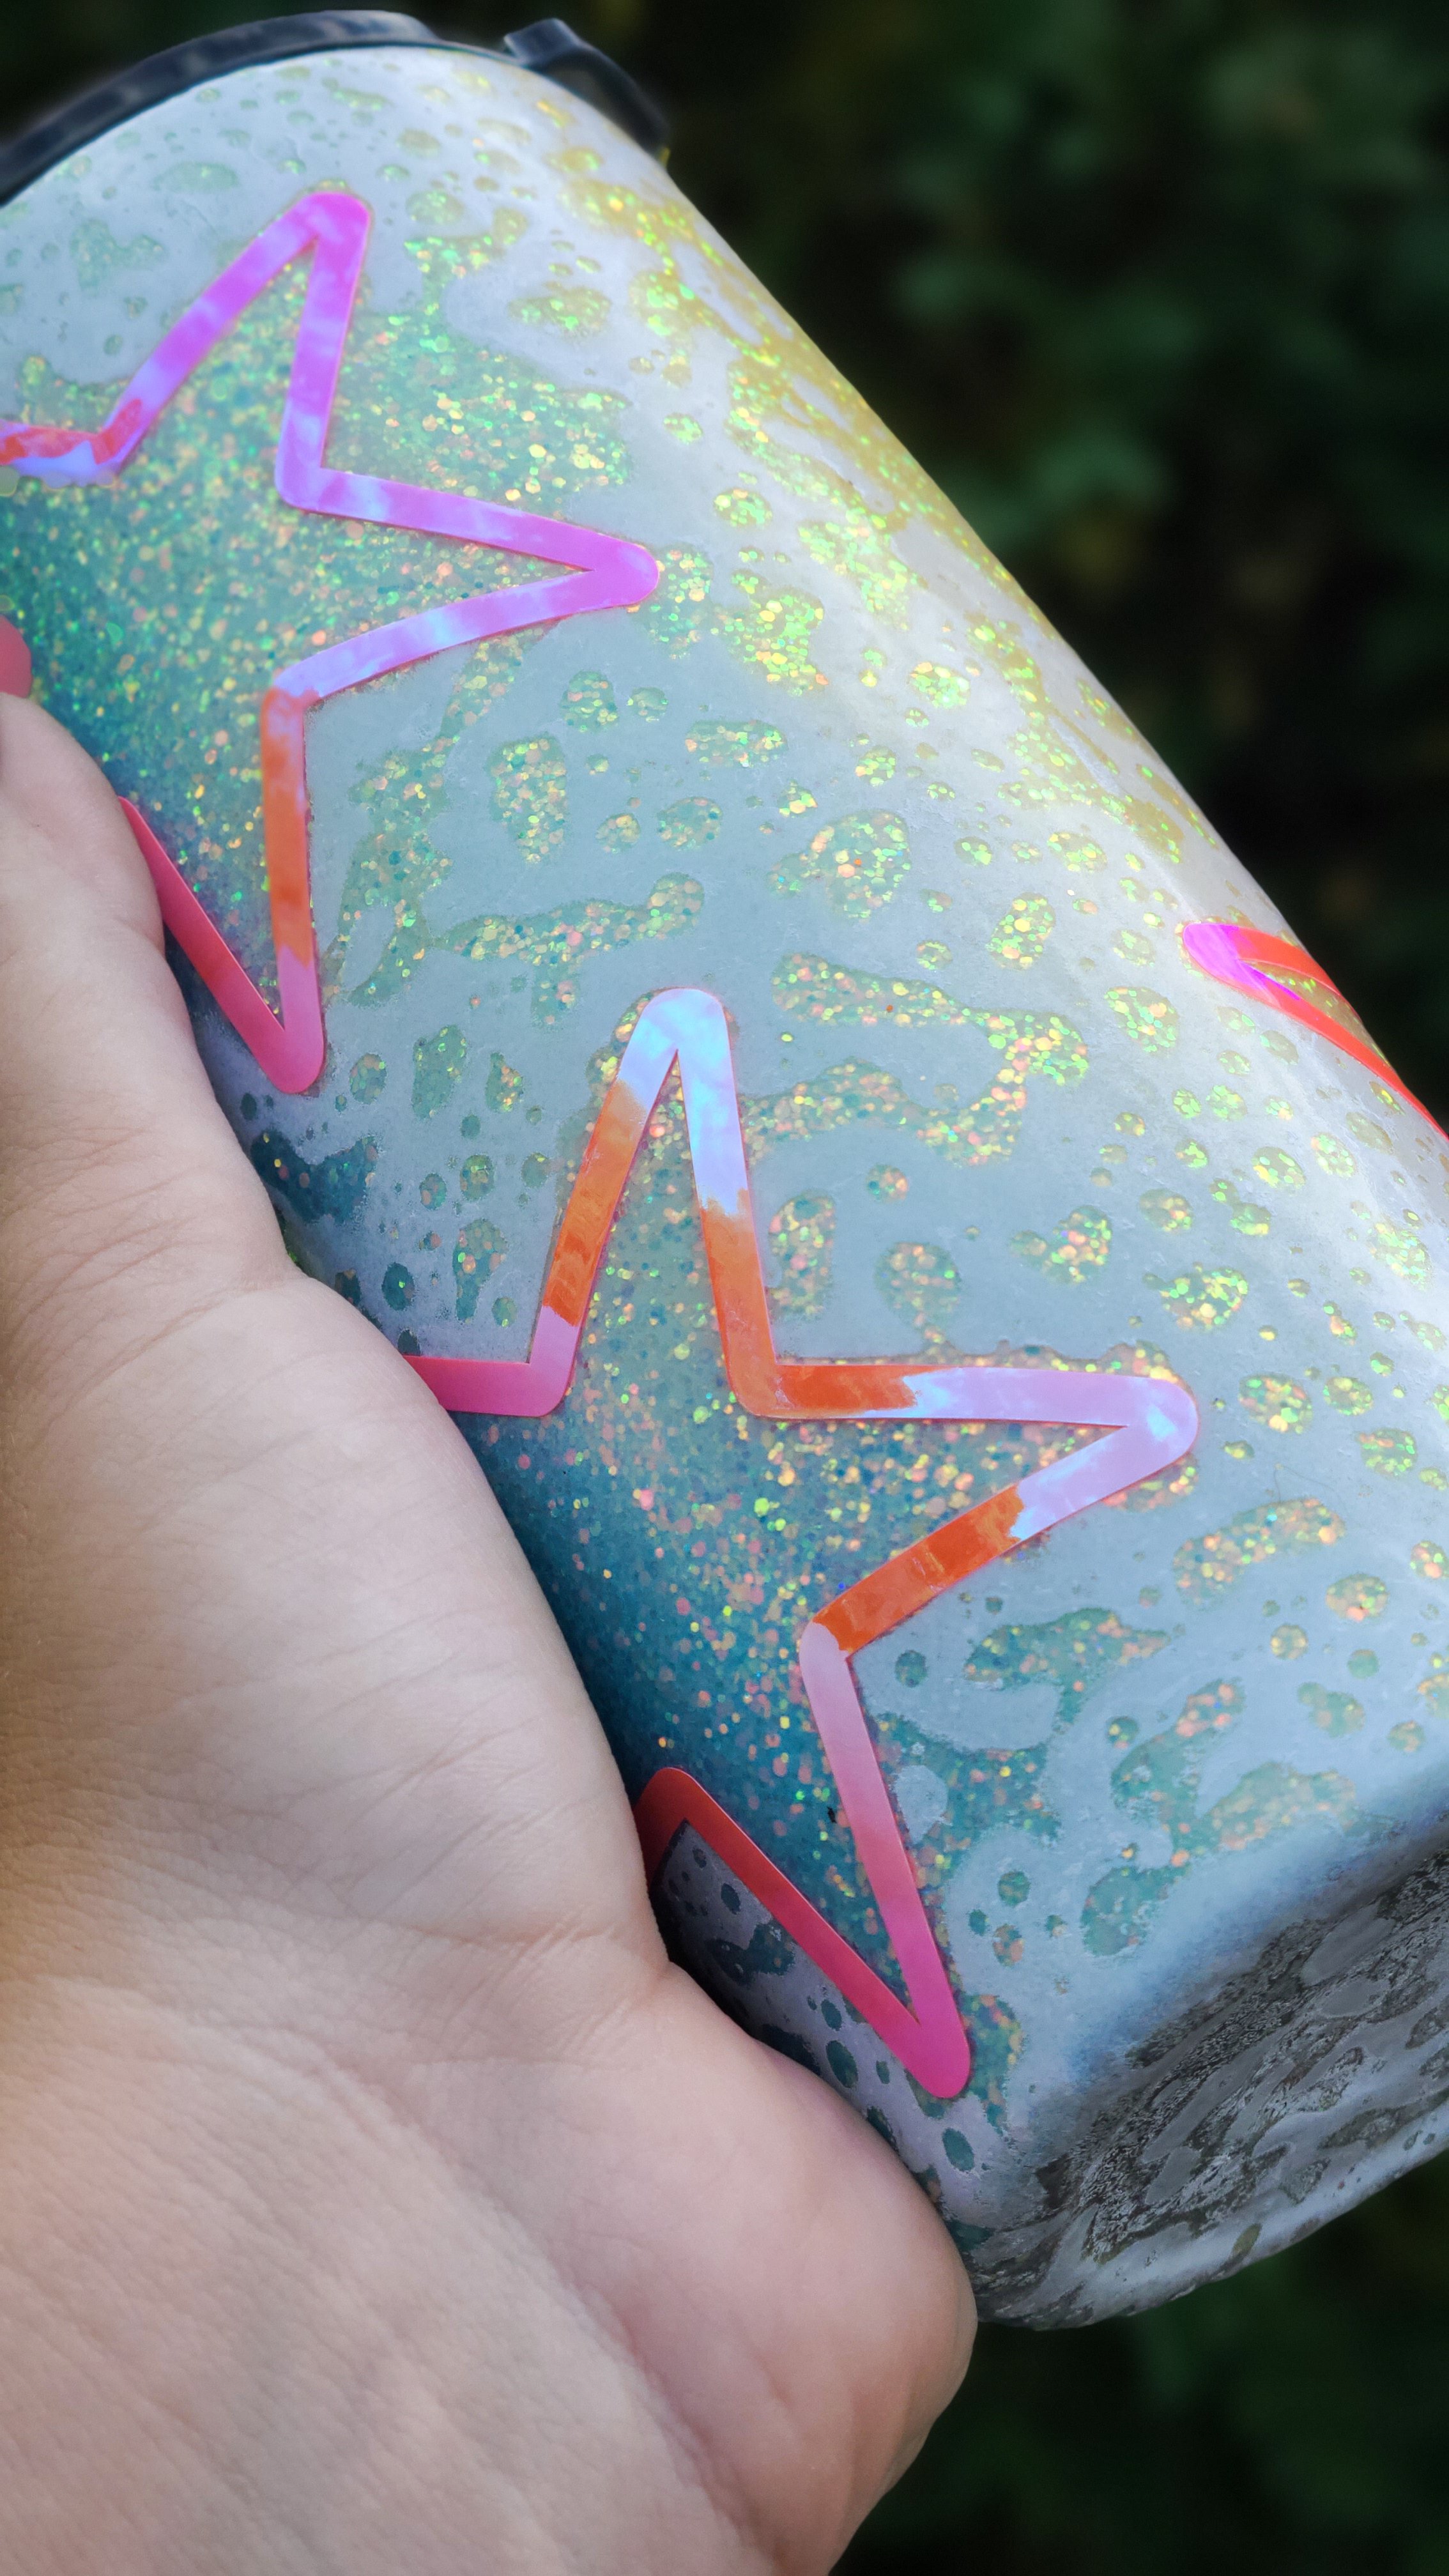 How to Prep a Tumbler For Glitter & Crystalac — Alison Crafts